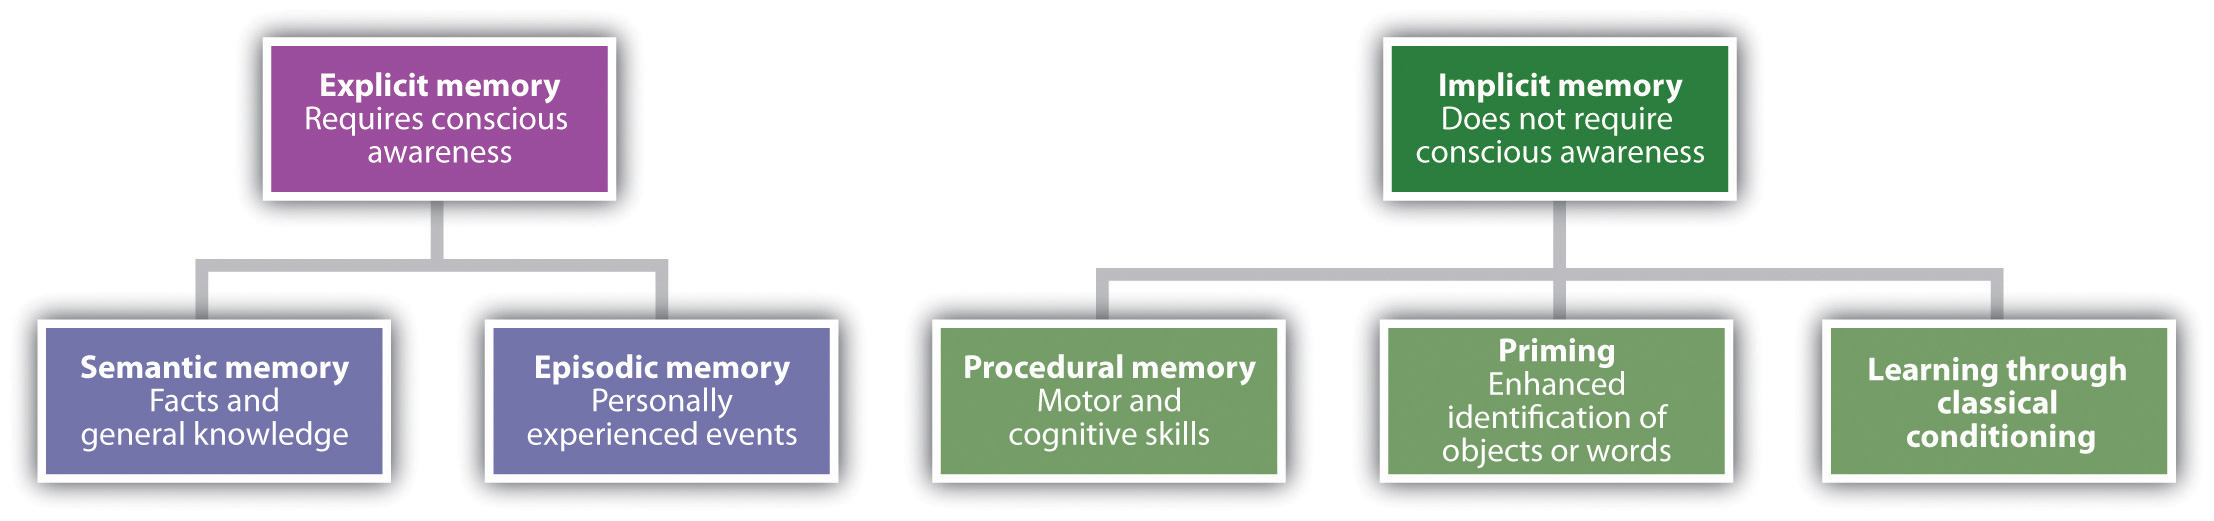 implicit memory examples